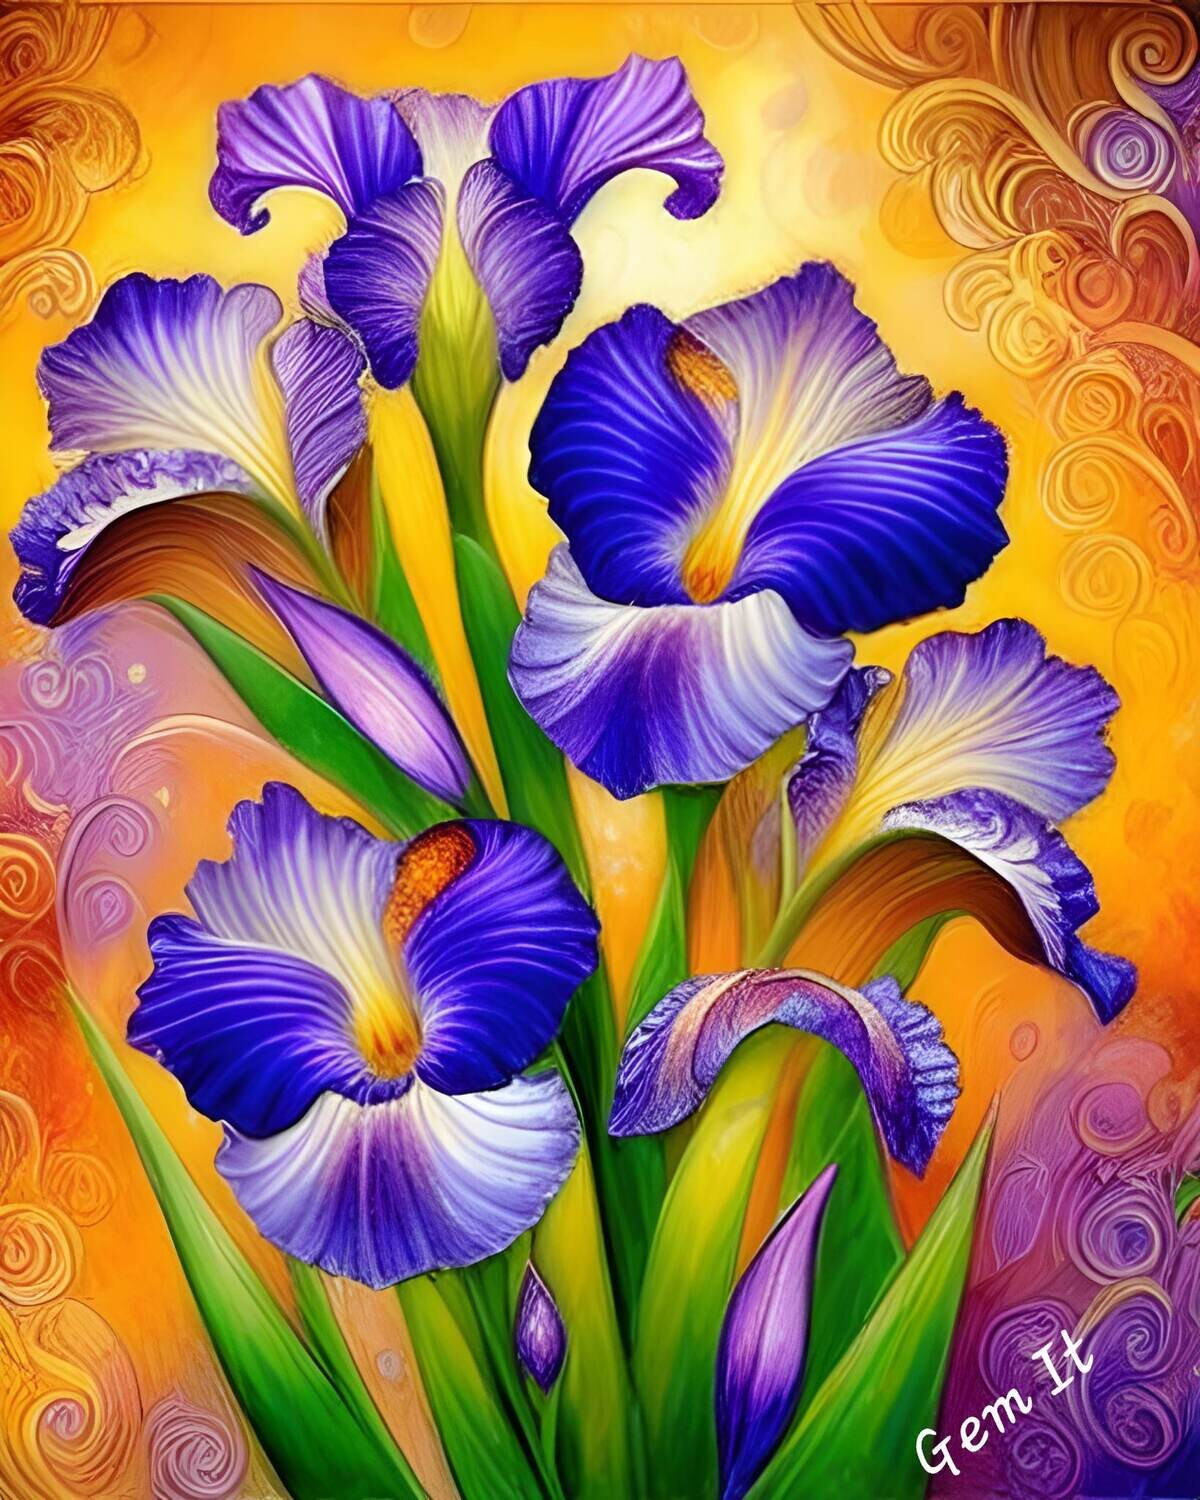 Iris 121 - Specially ordered for you. Delivery is approximately 4 - 6 weeks.